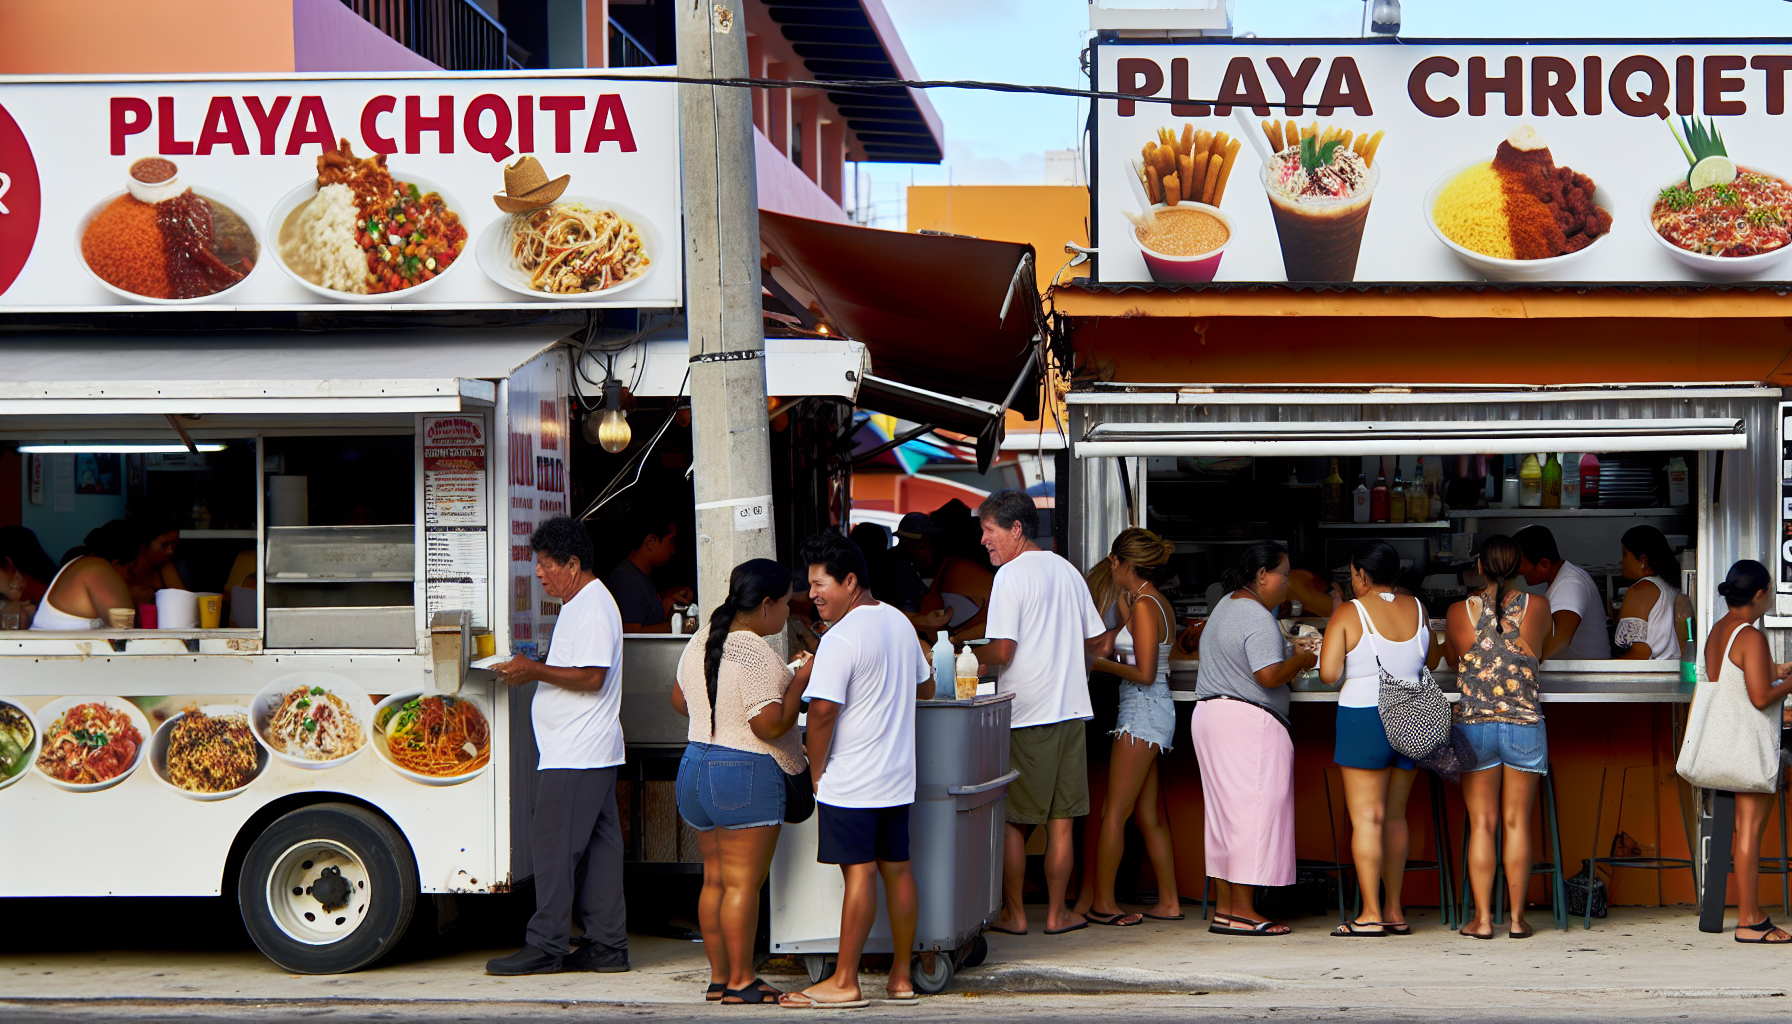 Delicious local and international cuisine in Playa Chiquita